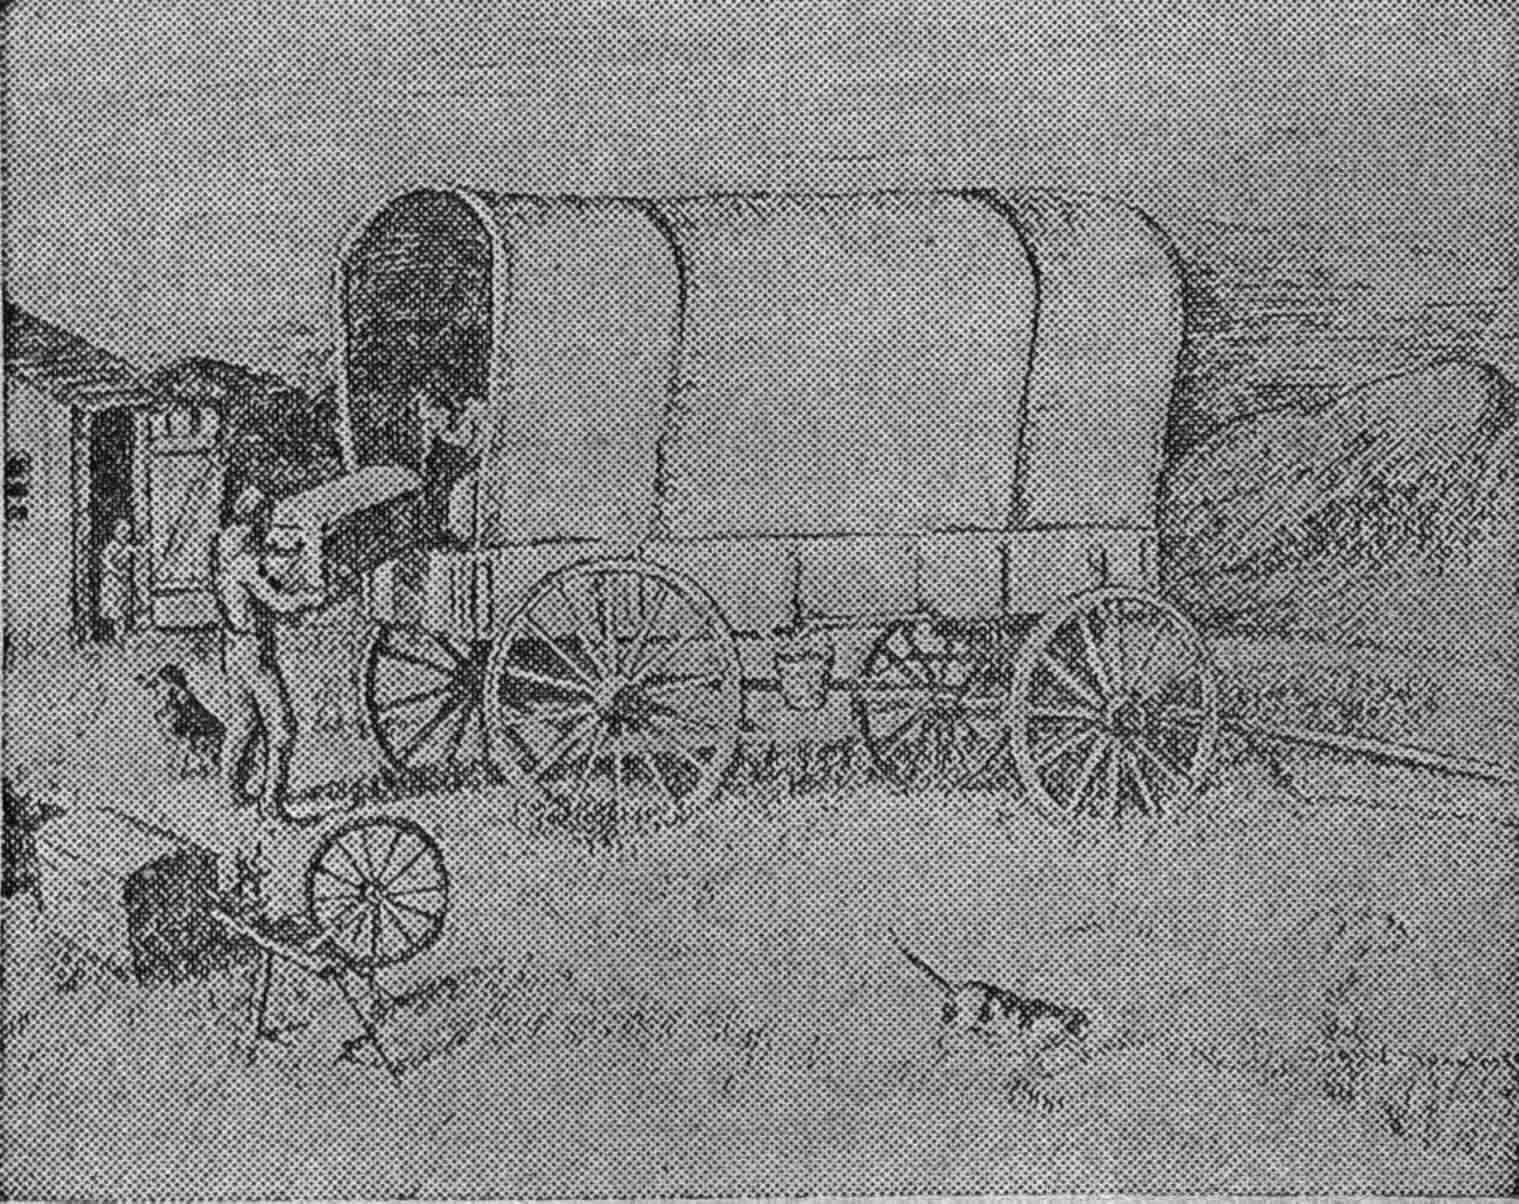 sketch of loading the wagons